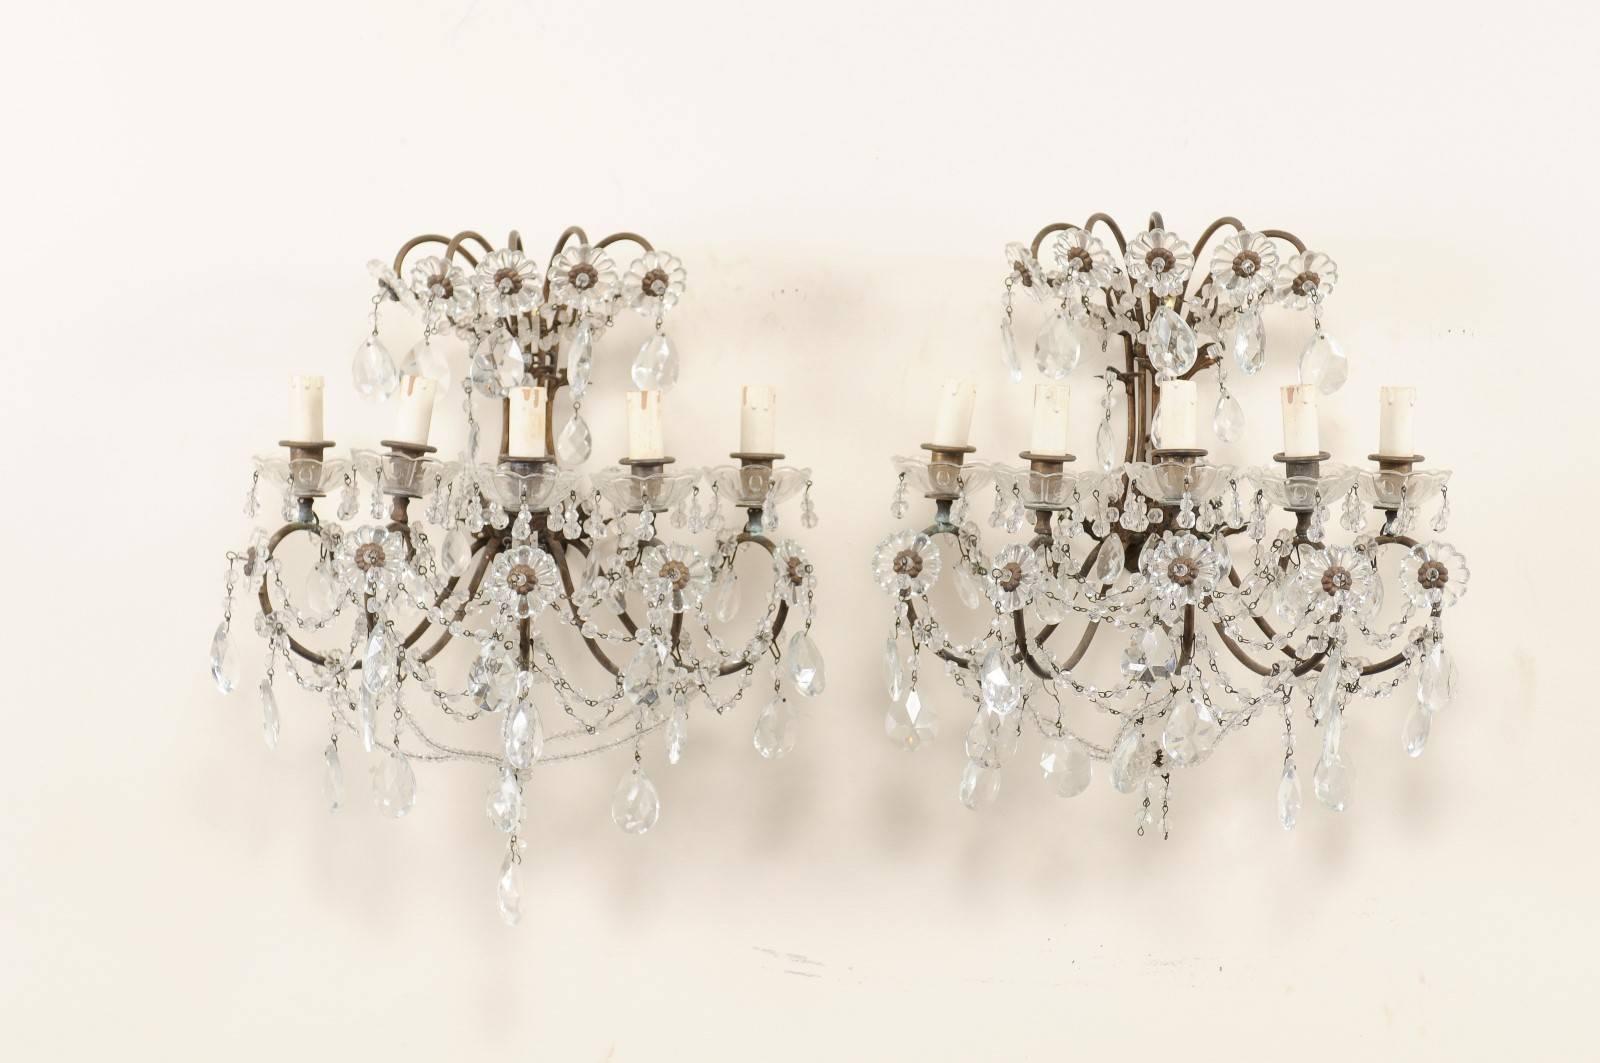 A pair of Italian crystal five-light sconces from the mid-20th century. This pair of Italian crystal sconces each feature five lights set within scrolling metal armature, adorn with delicately swagged crystals, beading and crystal flowers